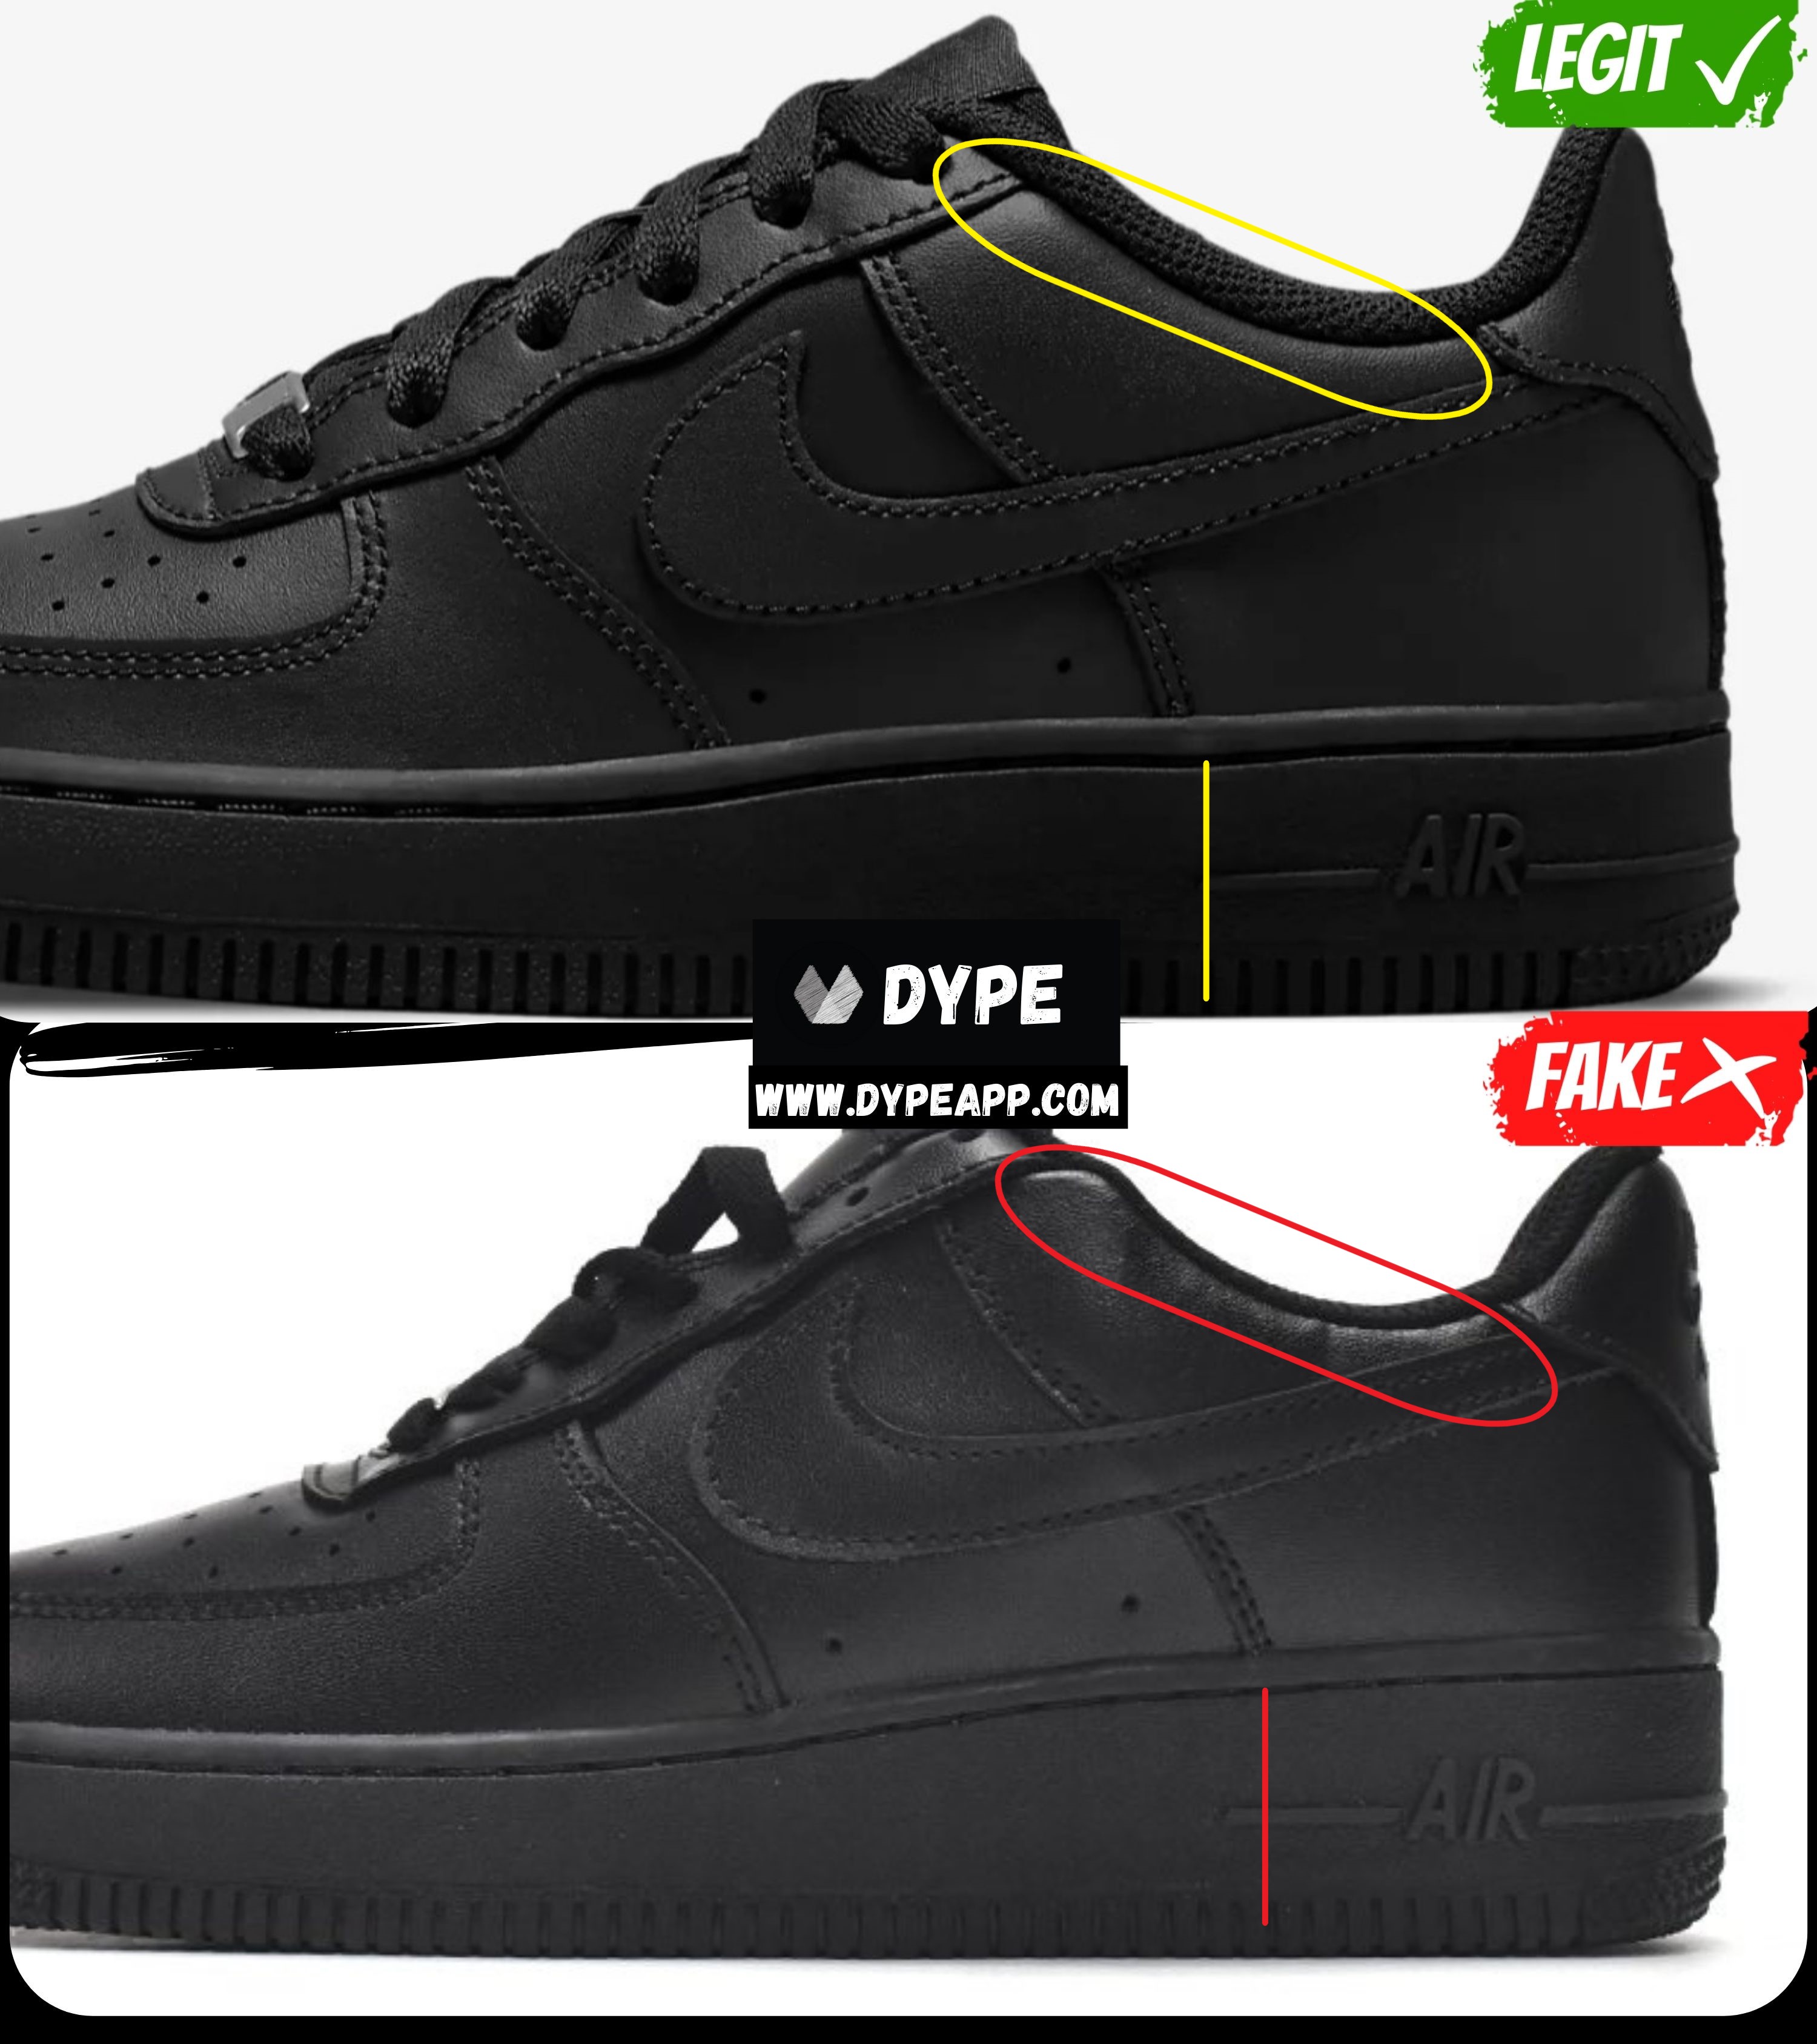 fake vs real air force 1s｜TikTok Search